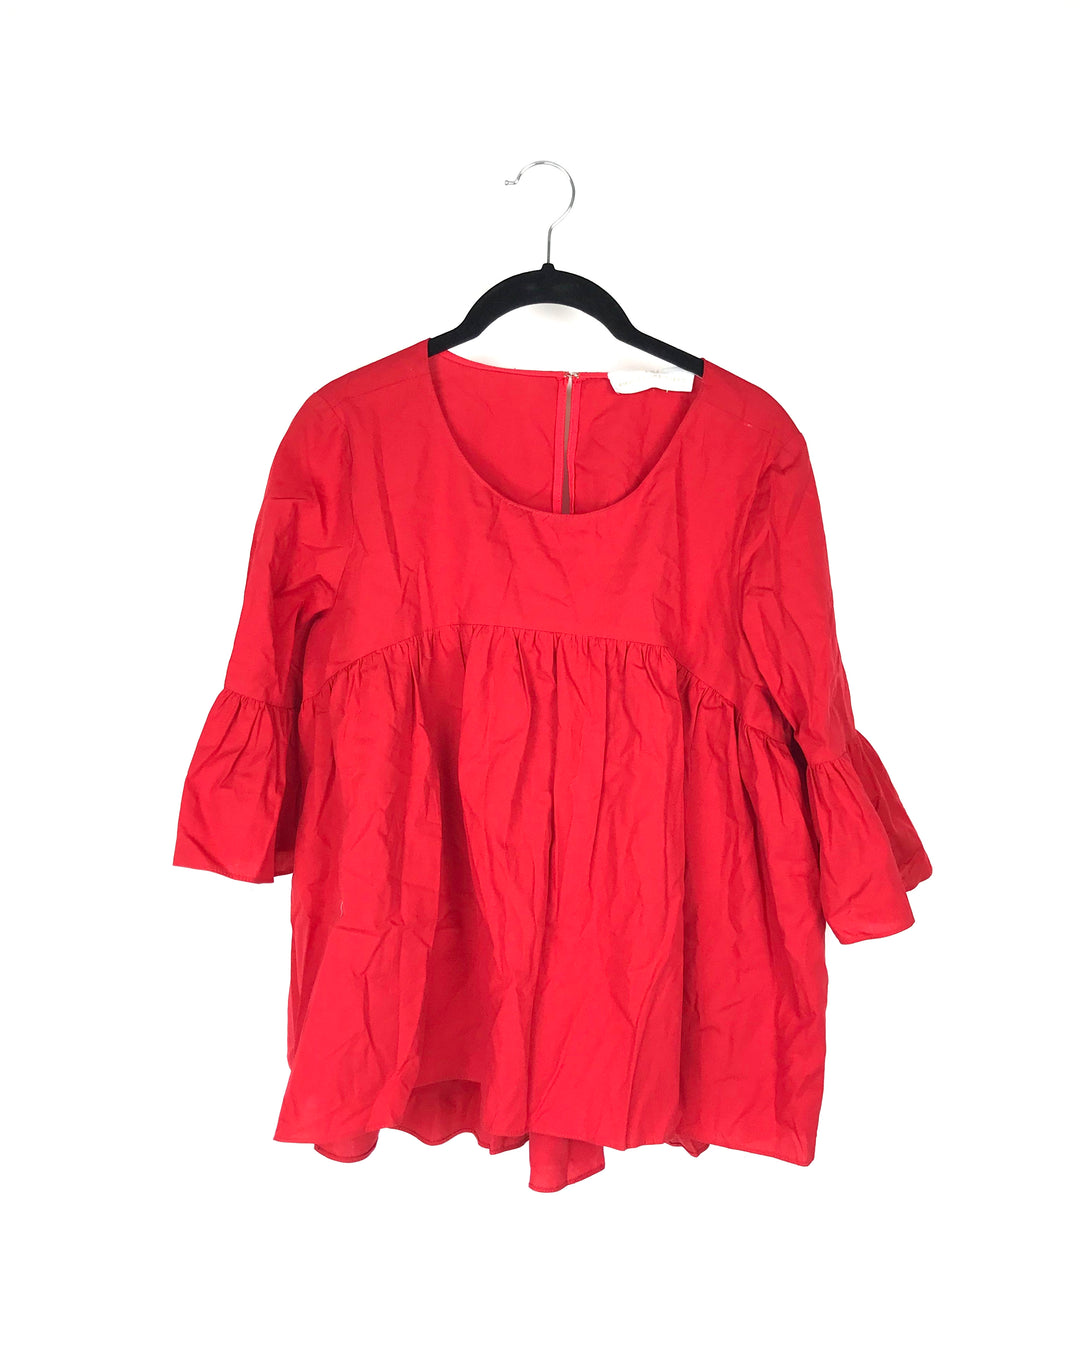 Red Blouse - Small